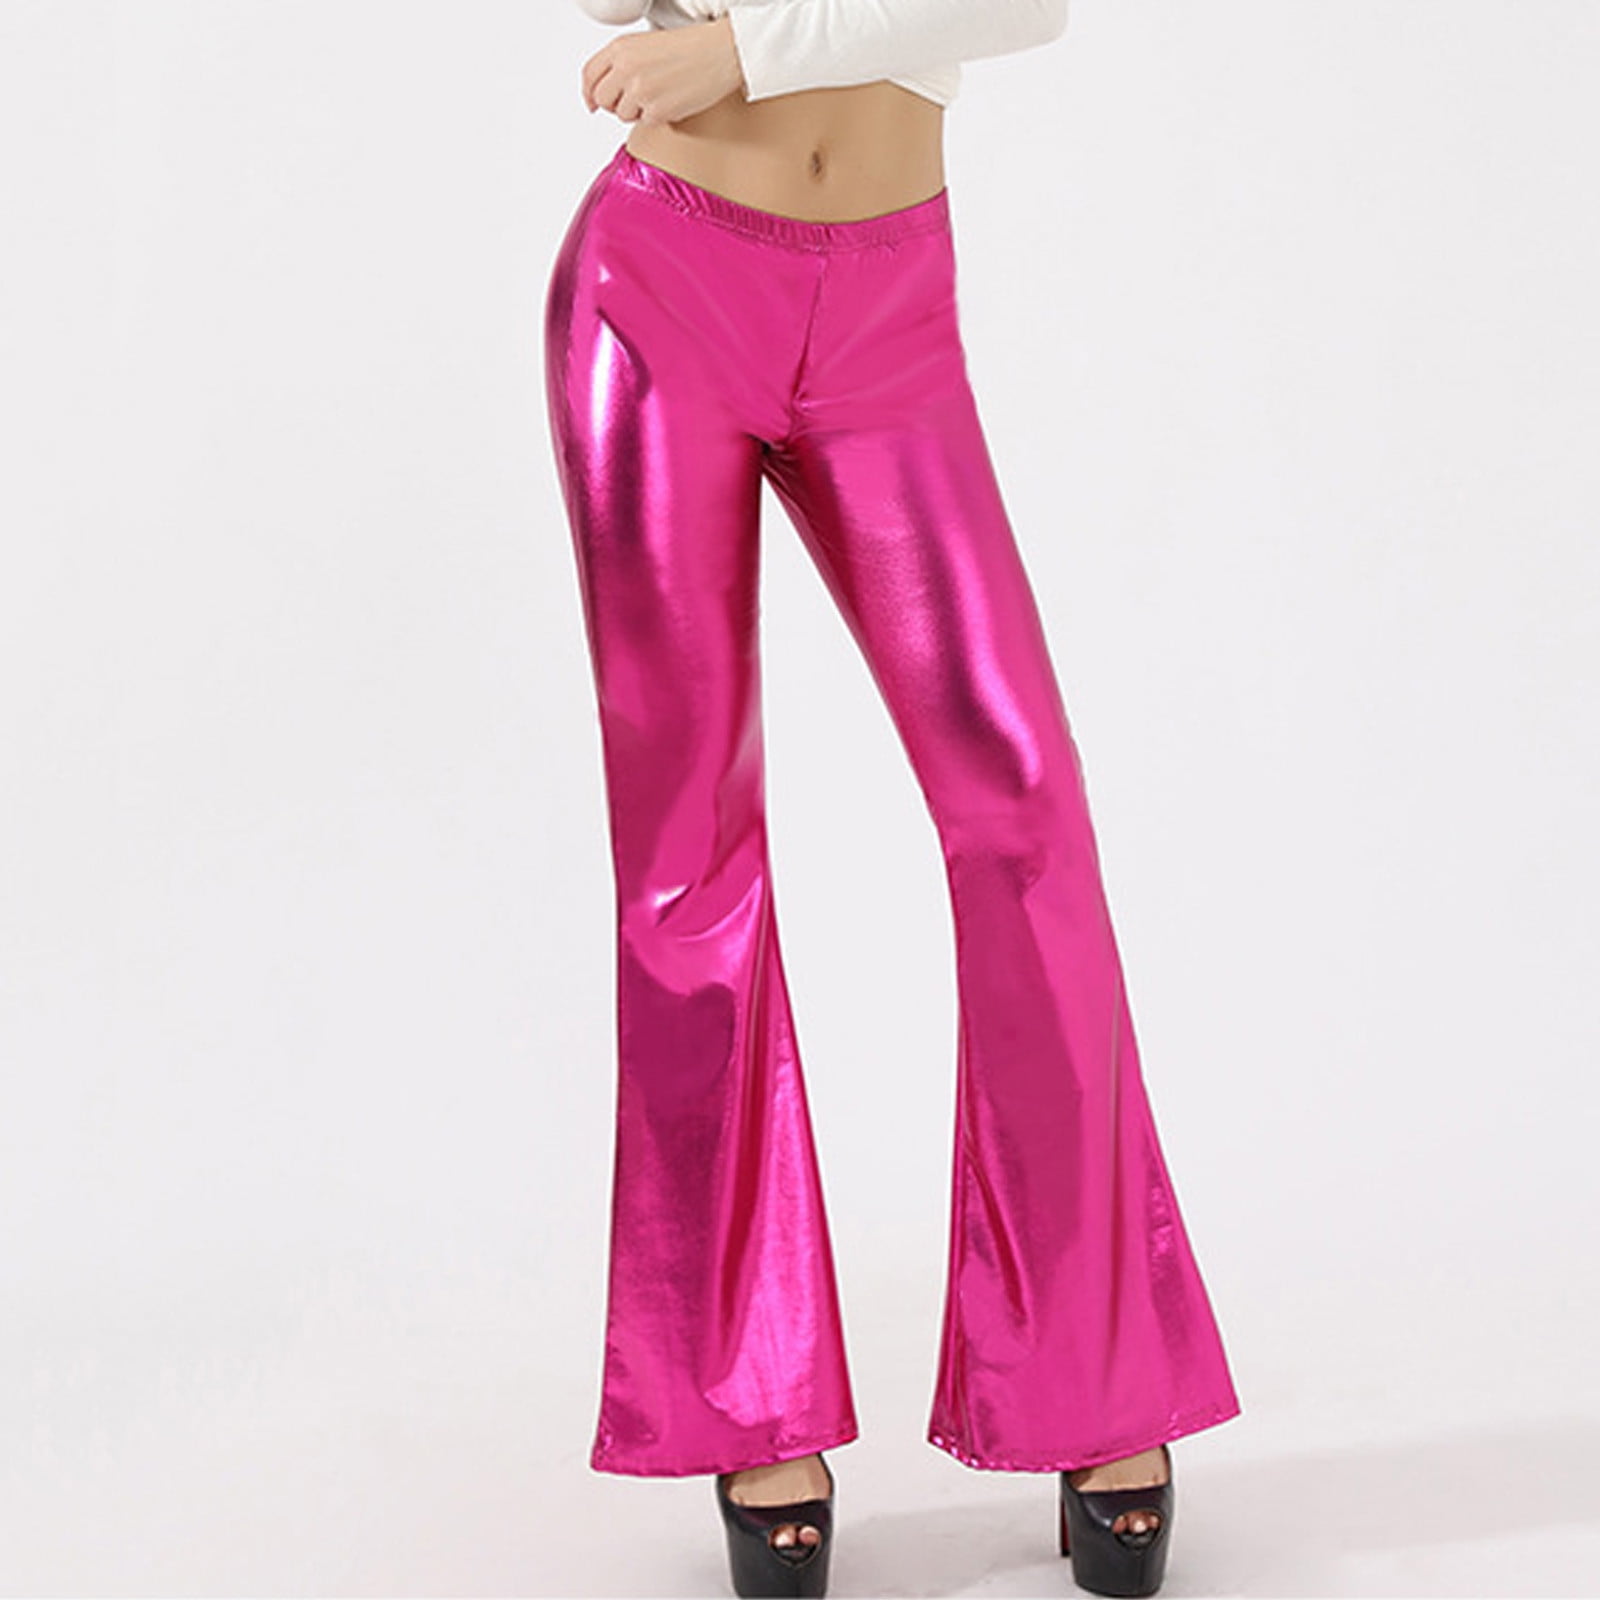 Hot Pink Flare Pants for Women